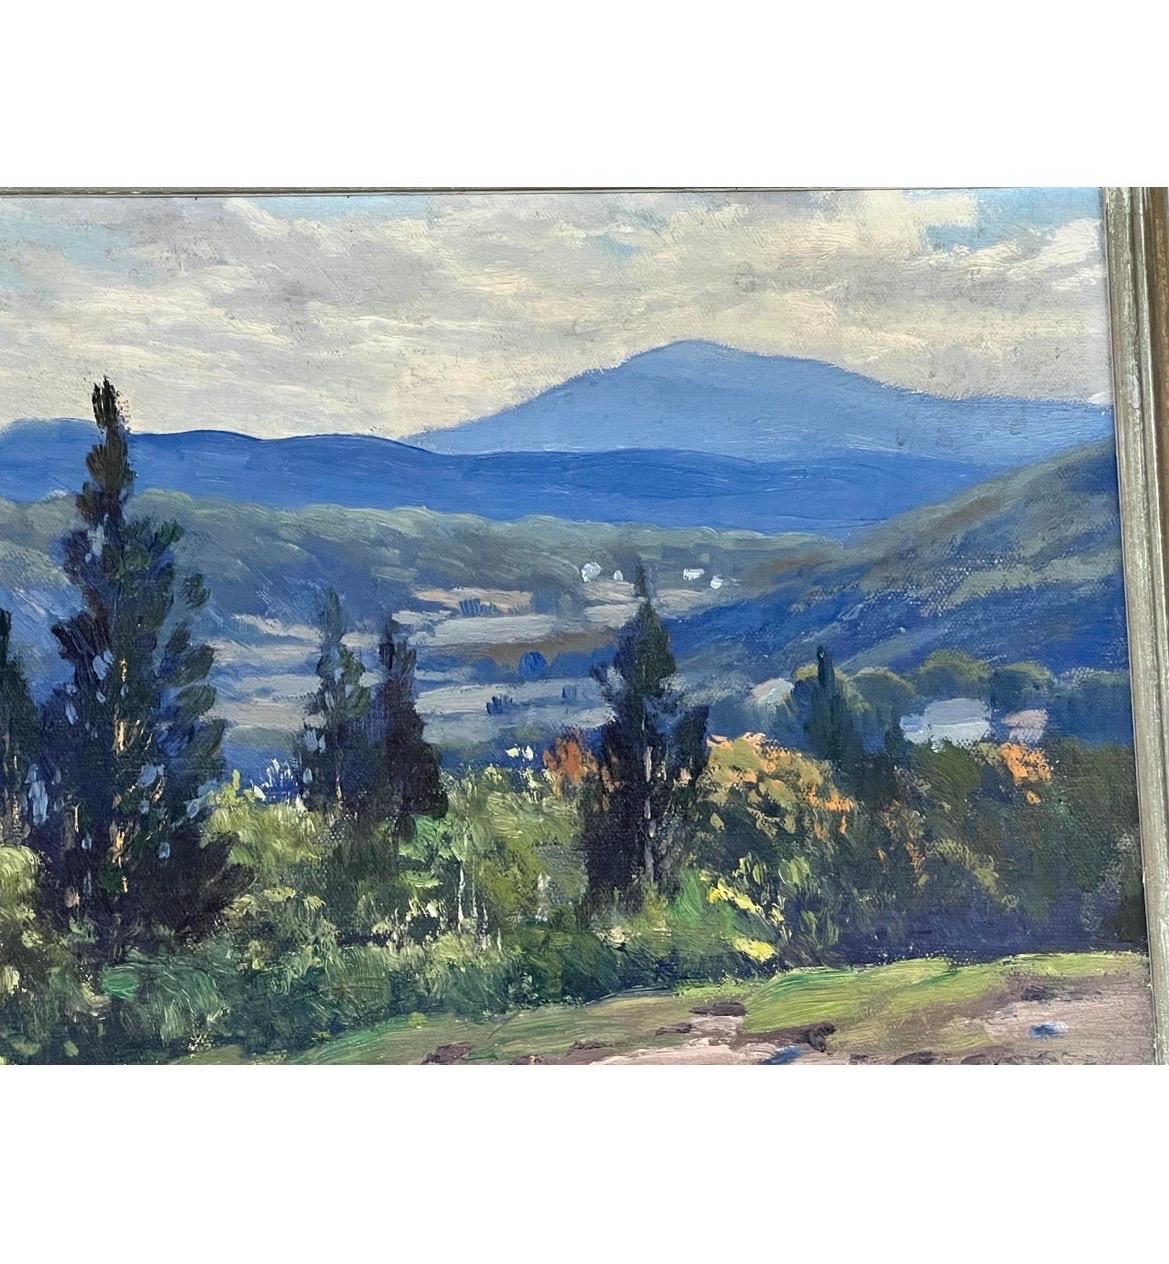 CHARLES GORDON HARRIS (RI, 1891-1963). Stunning open air oil on board landscape of the New England countryside. Likely Vermont in the Spring. Original frame. Great collector piece